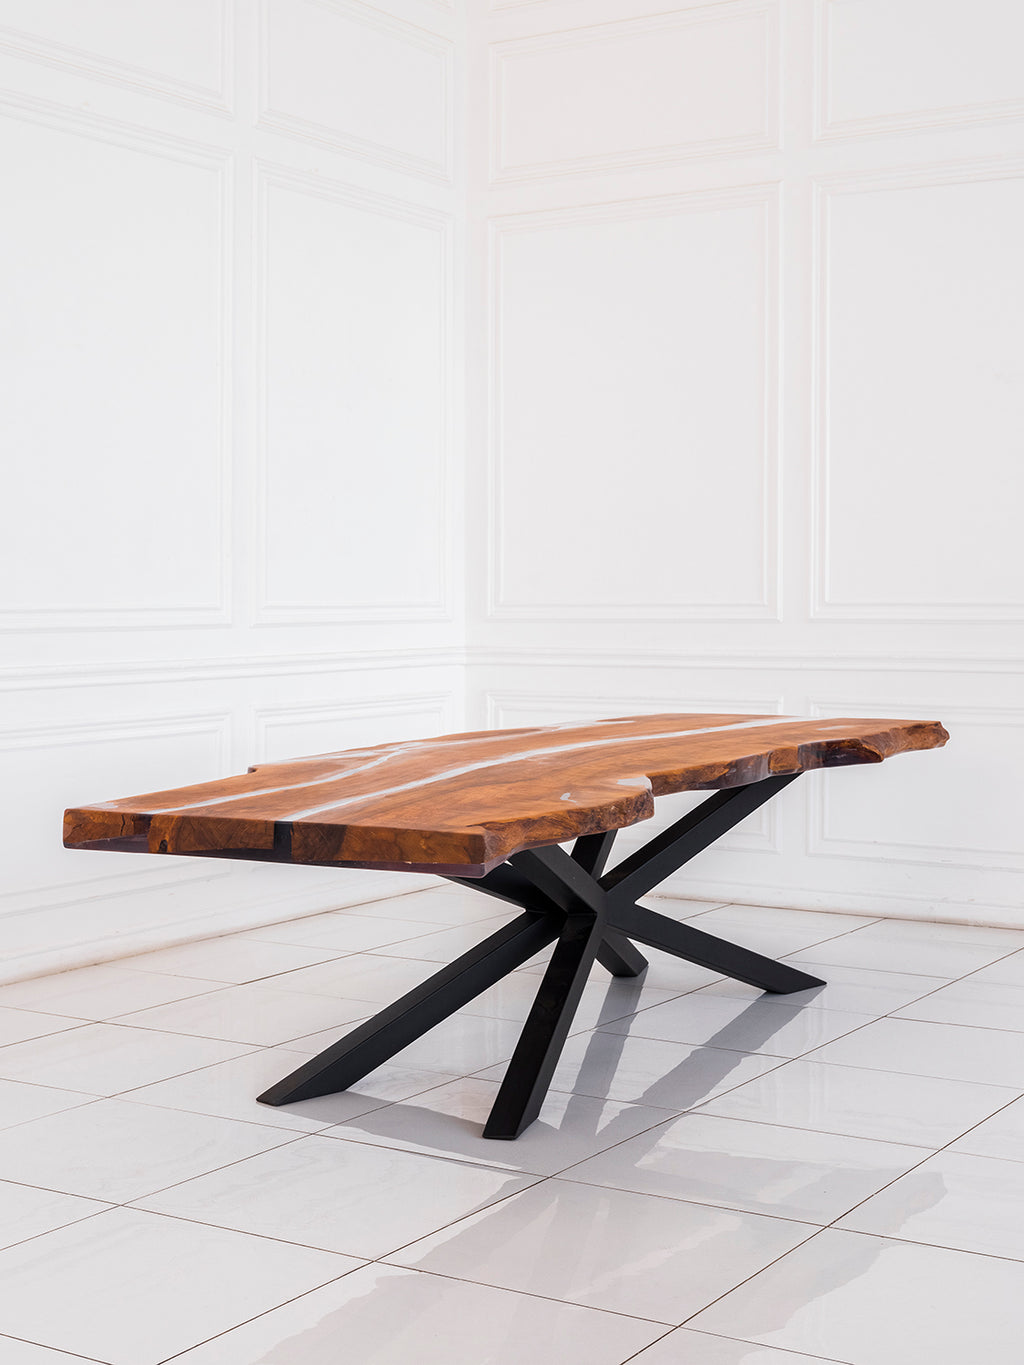 Hornbeam Wood Dining Table RESTO filled with Polymer Resin